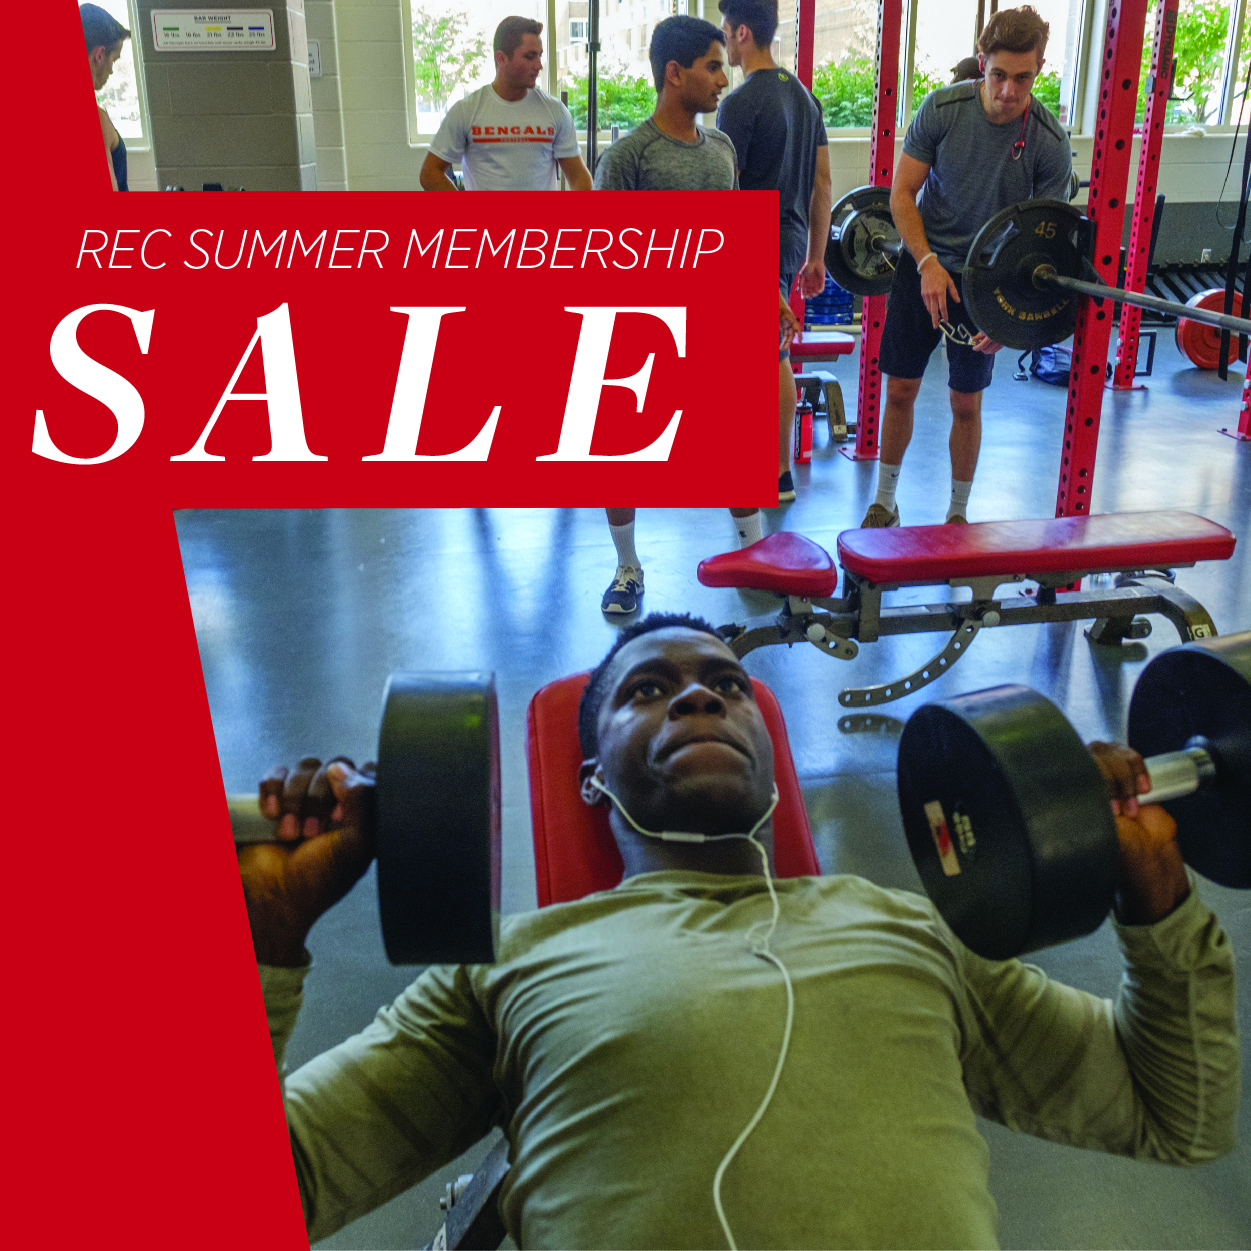  Rec Memberships are on sale for the summer.